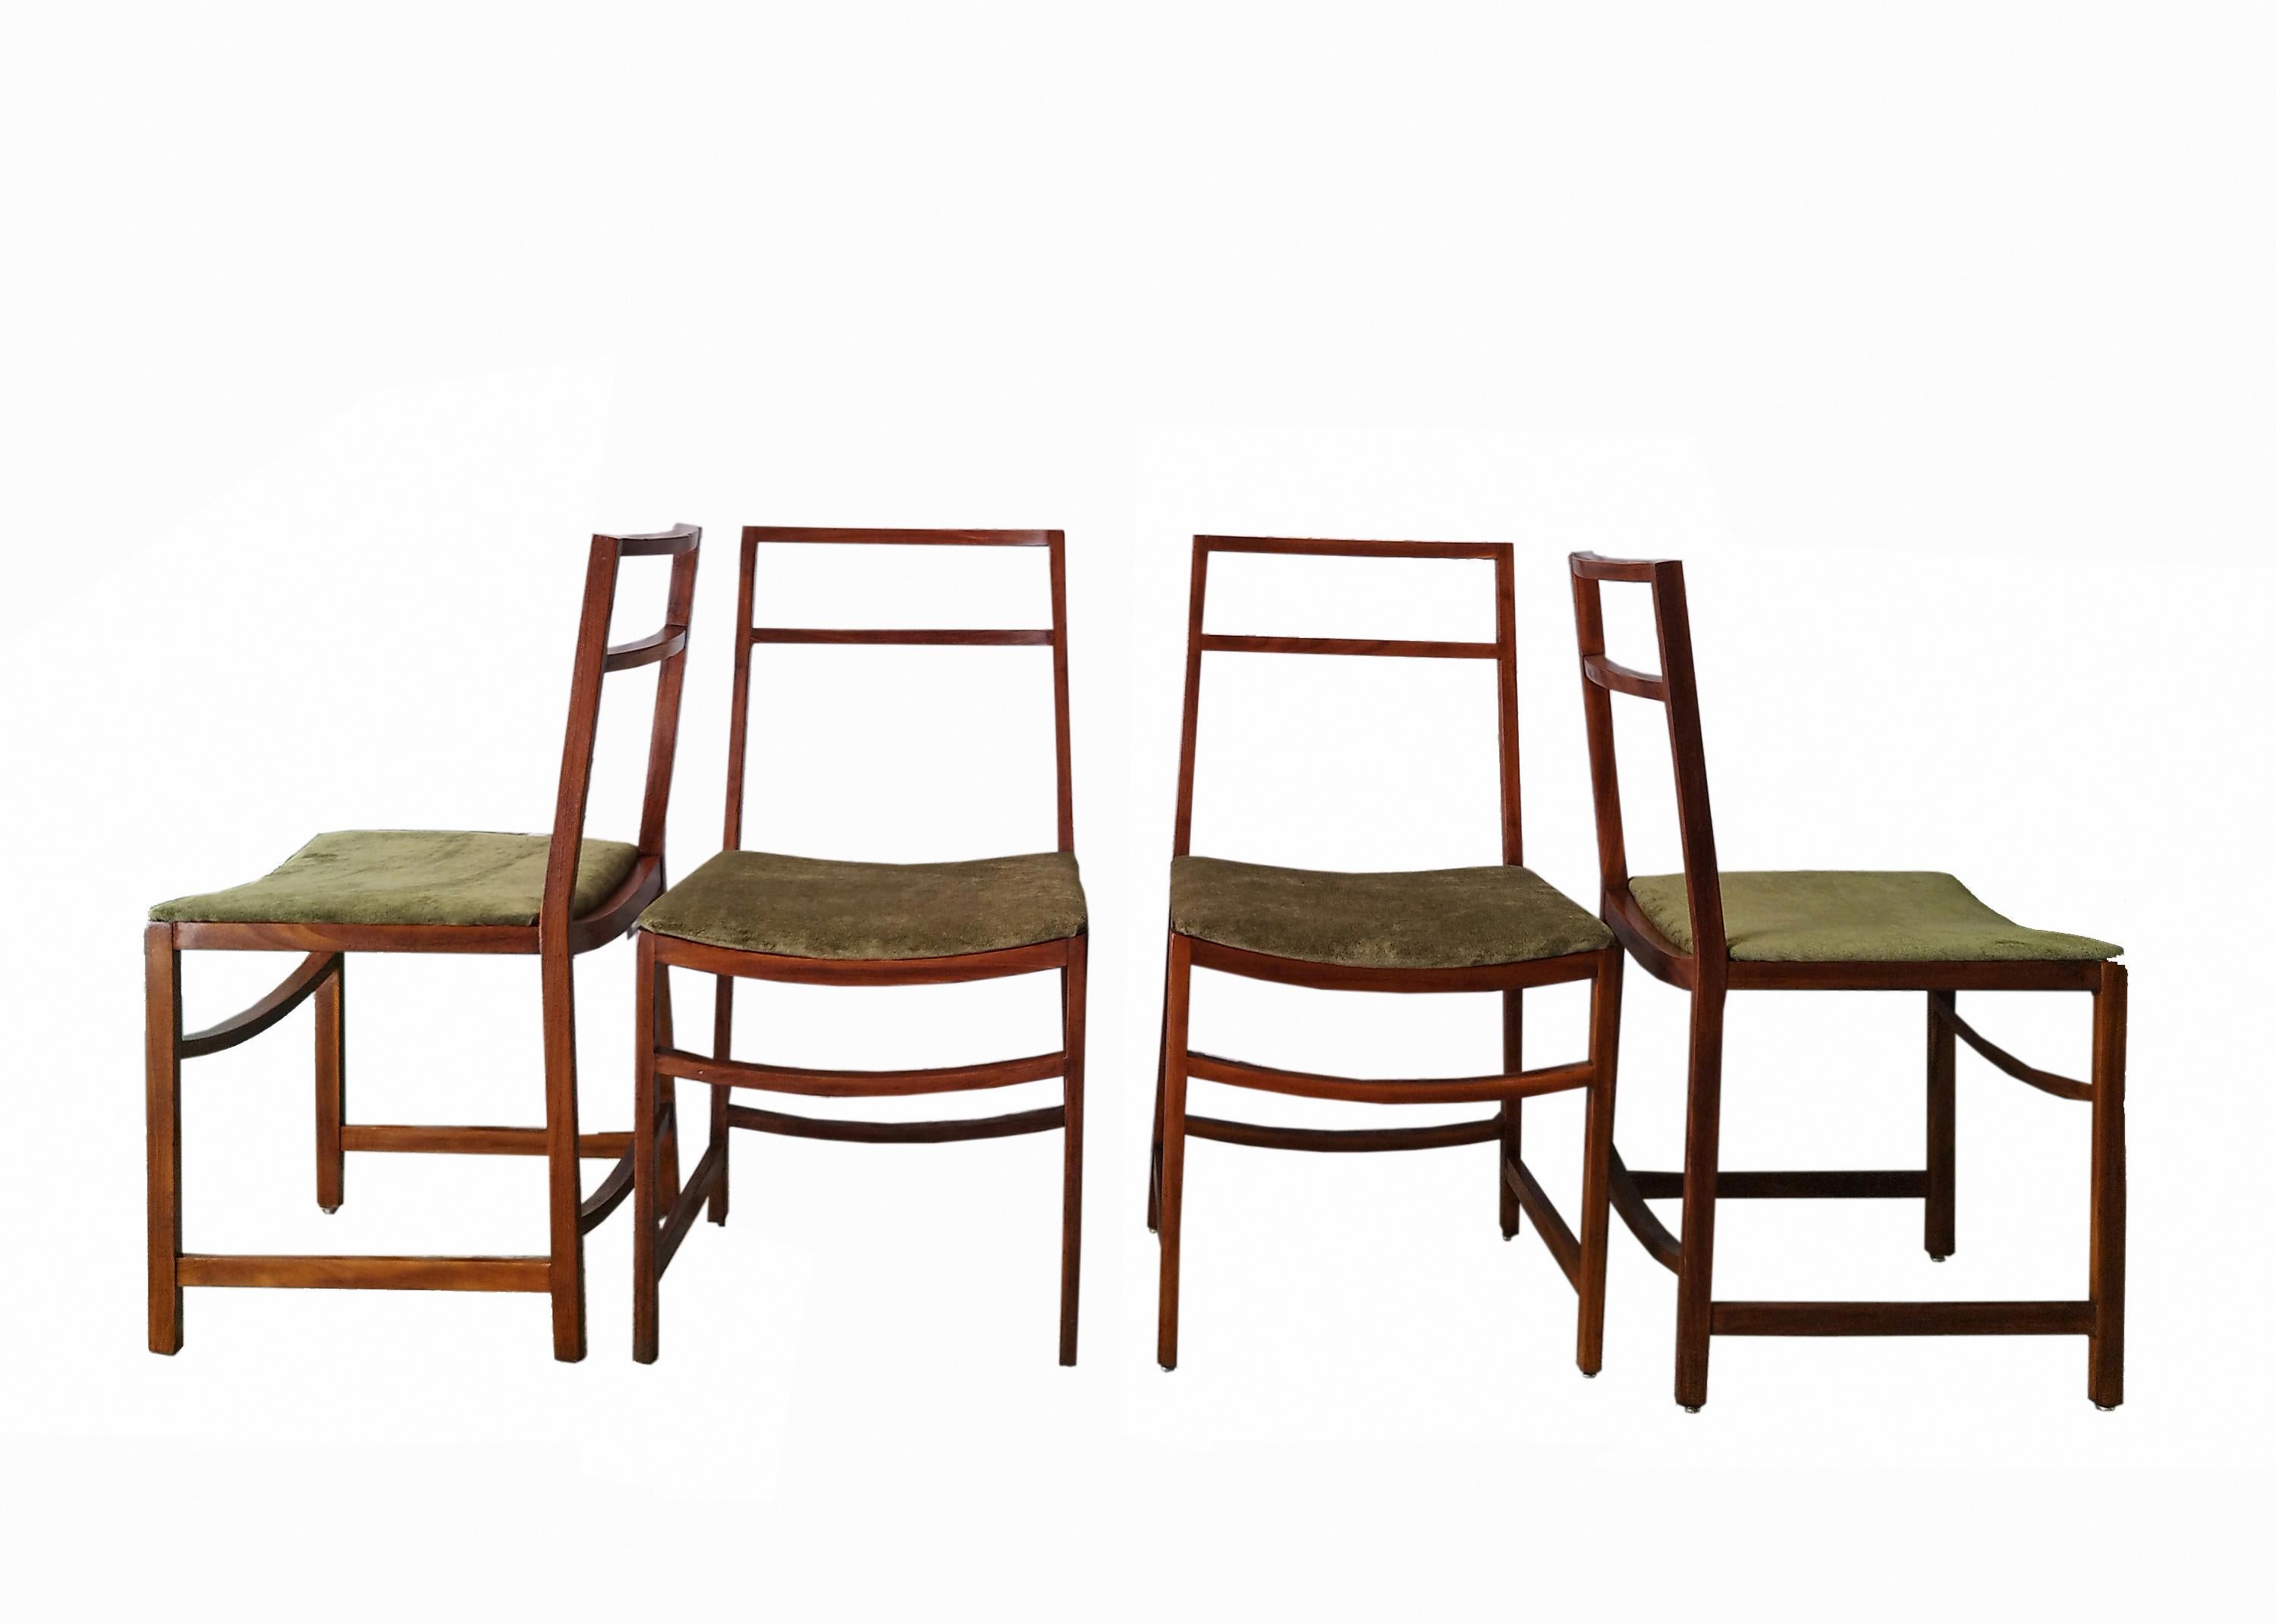 Chairs in wood and green fabric by Renato Venturi who designed these extraordinary chairs for MIM Rome in 1960s Italy. These fantastic chairs have a solid wood frame and beautifully new ivory boucle'fabric seats. Comes with the original MIM Roma